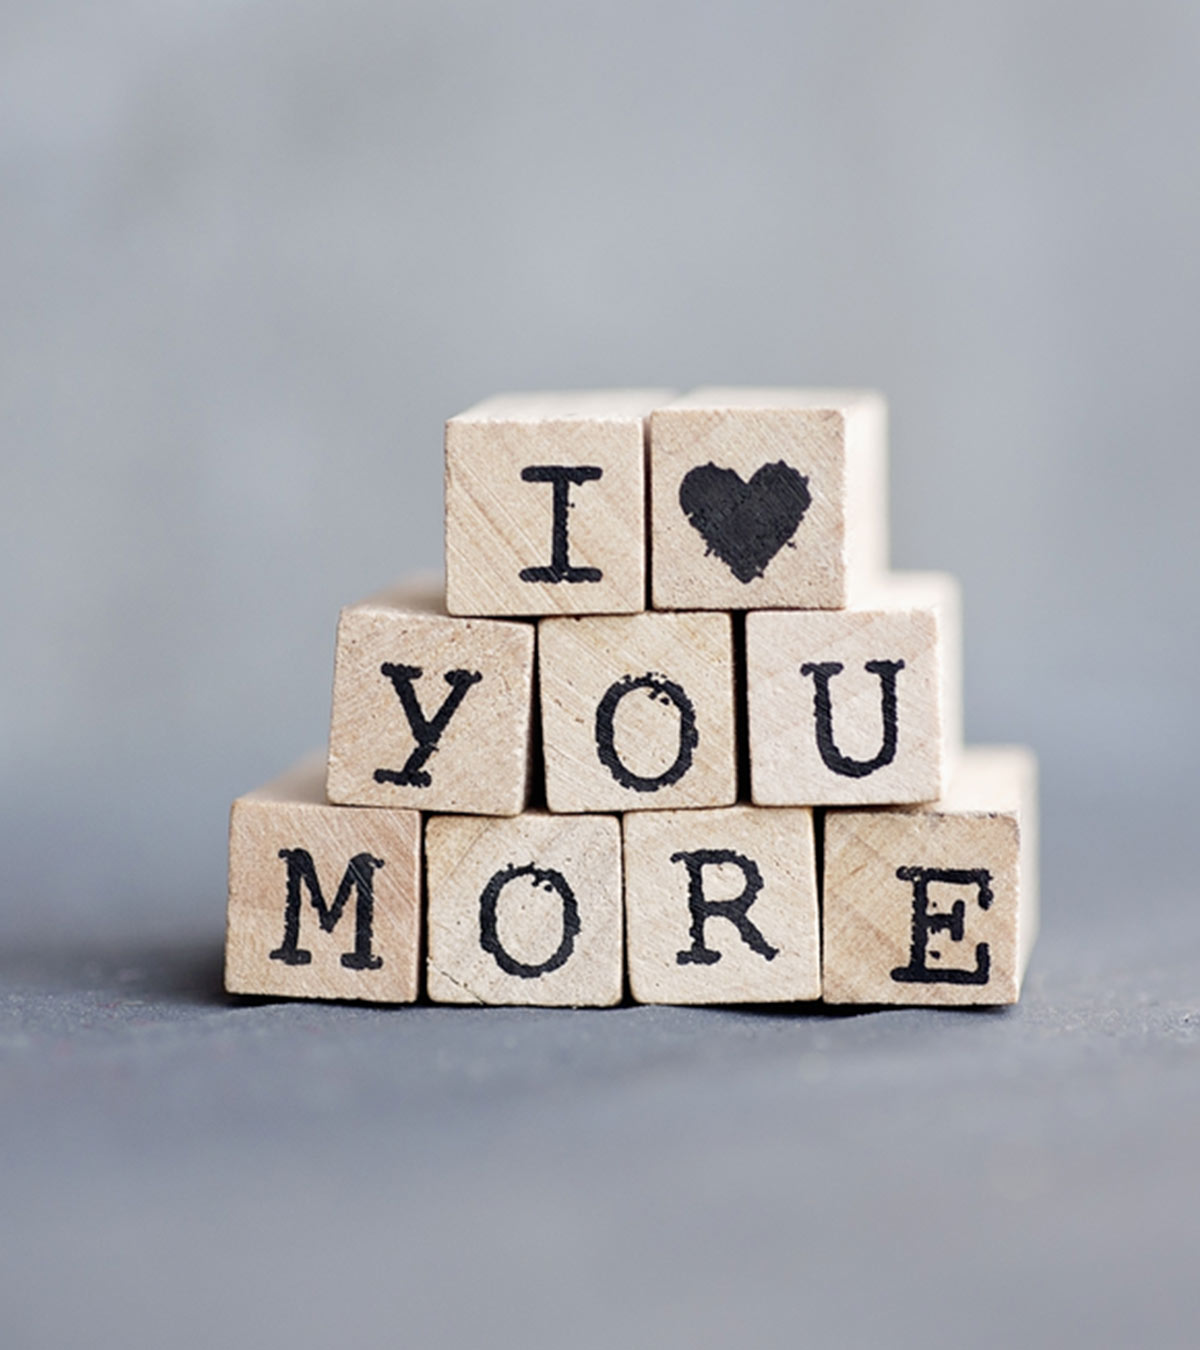 250+ 'I Love You More Than' Quotes